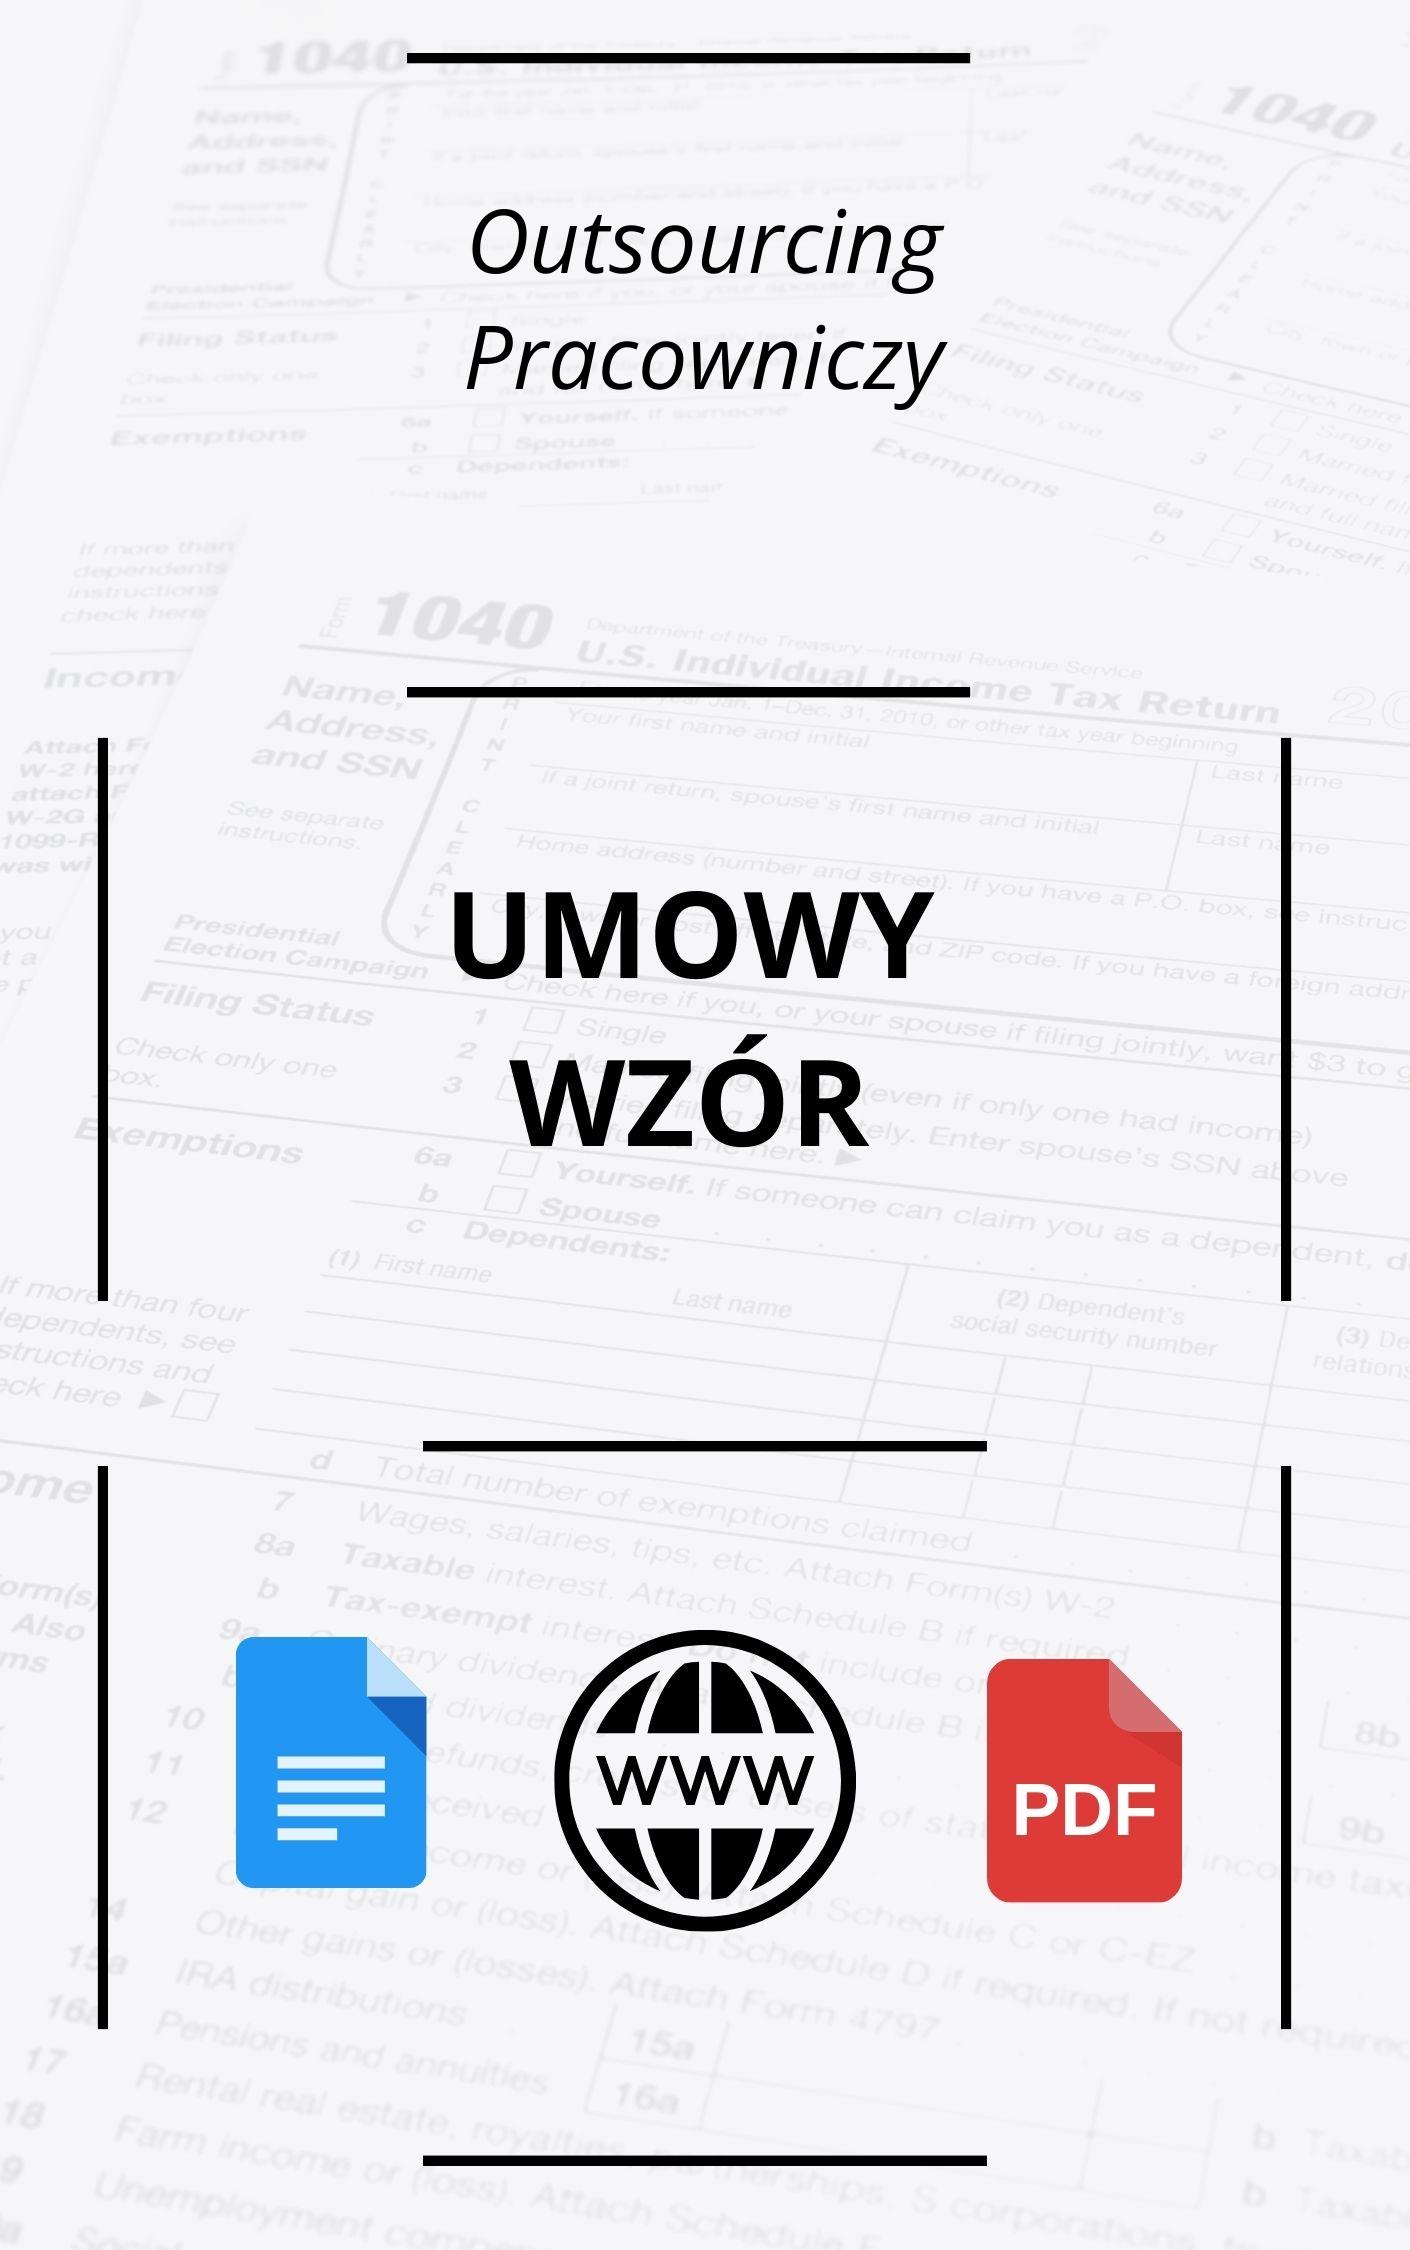 Umowy Na Outsourcing Pracowniczy